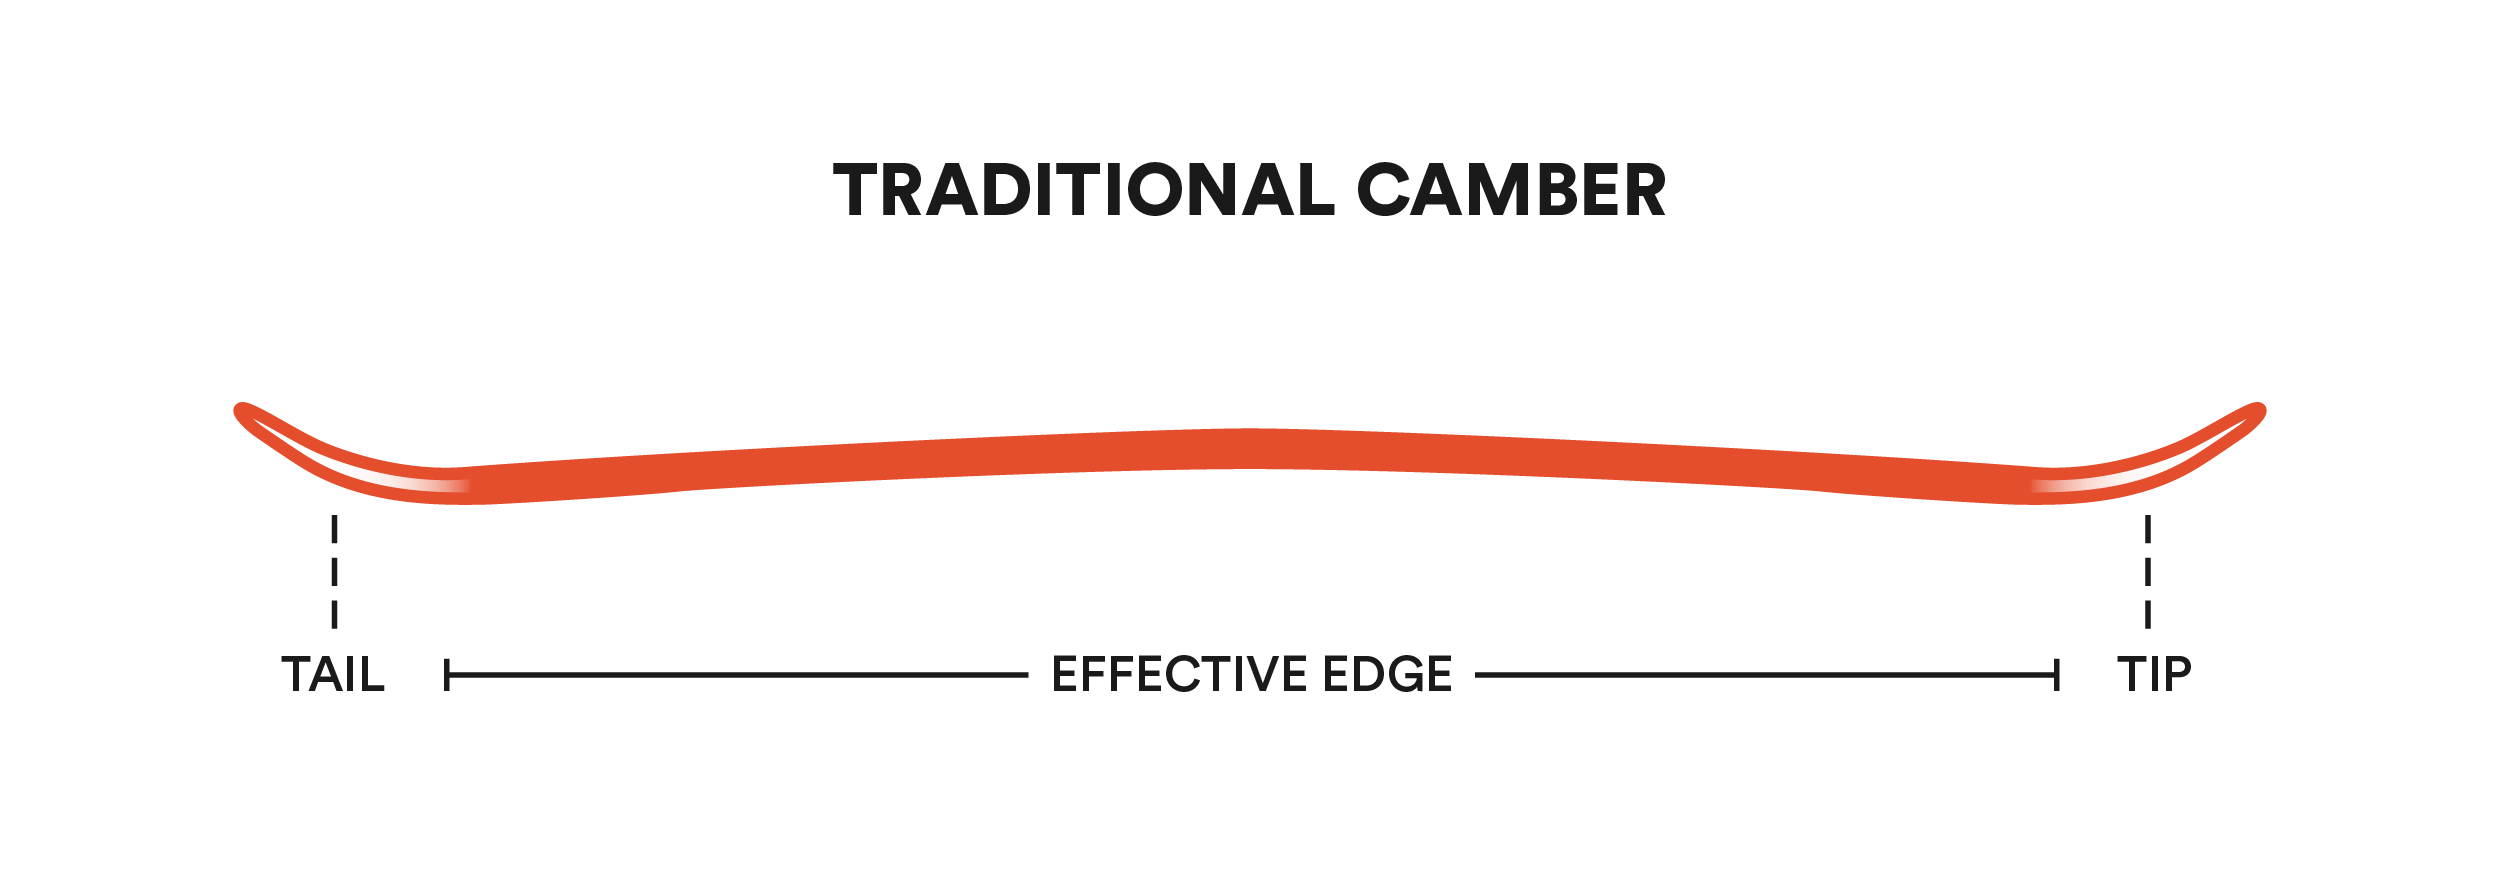 Graphic depicting the traditional camber snowboard shape - imagine a mustache that bends up like a rainbow in the middle and curves up like half a smile on the sides.